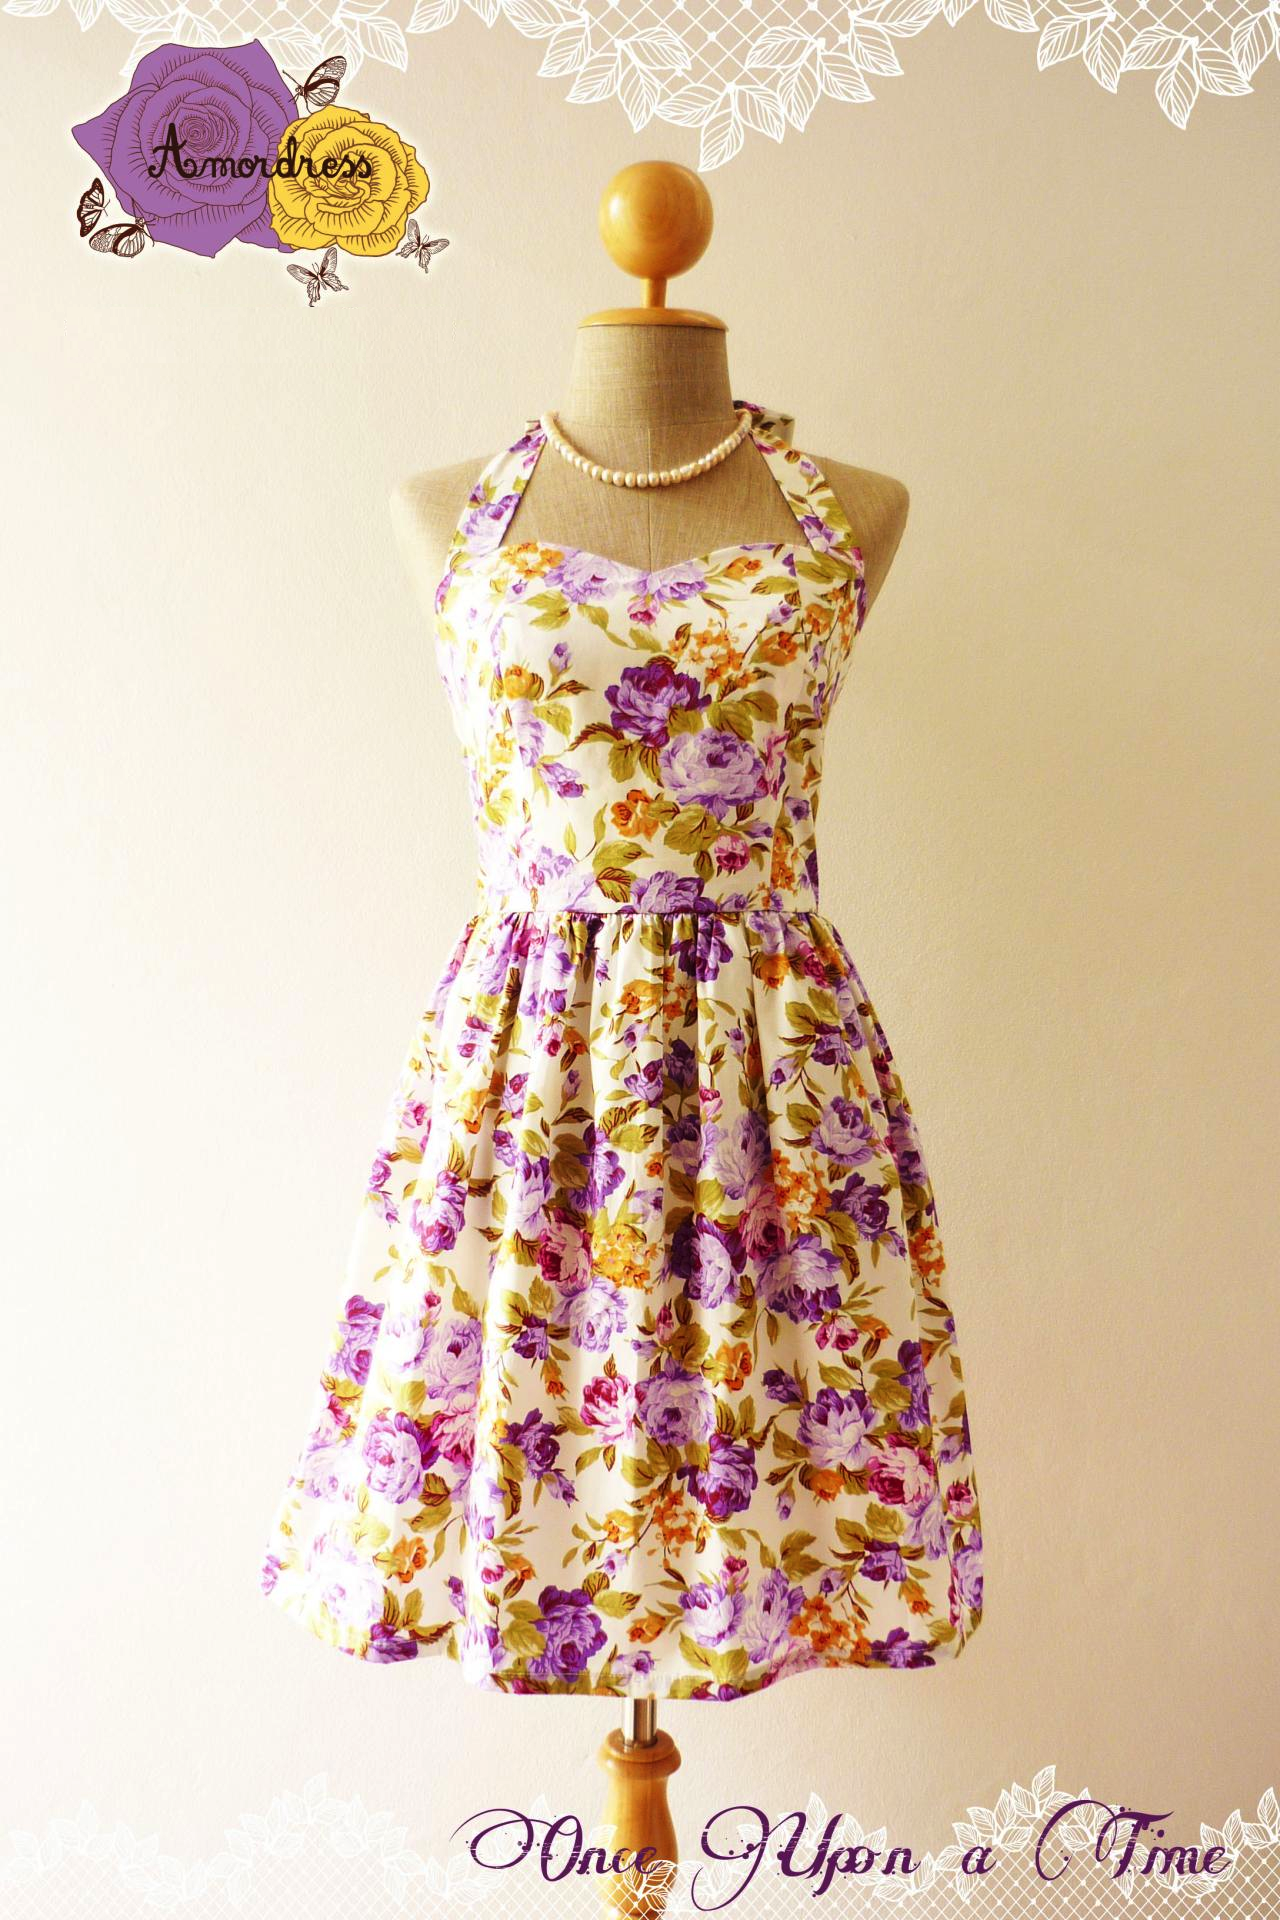 Floral Dress In Purple Once Upon A Time -Size XS, S, M, L, XL on Luulla